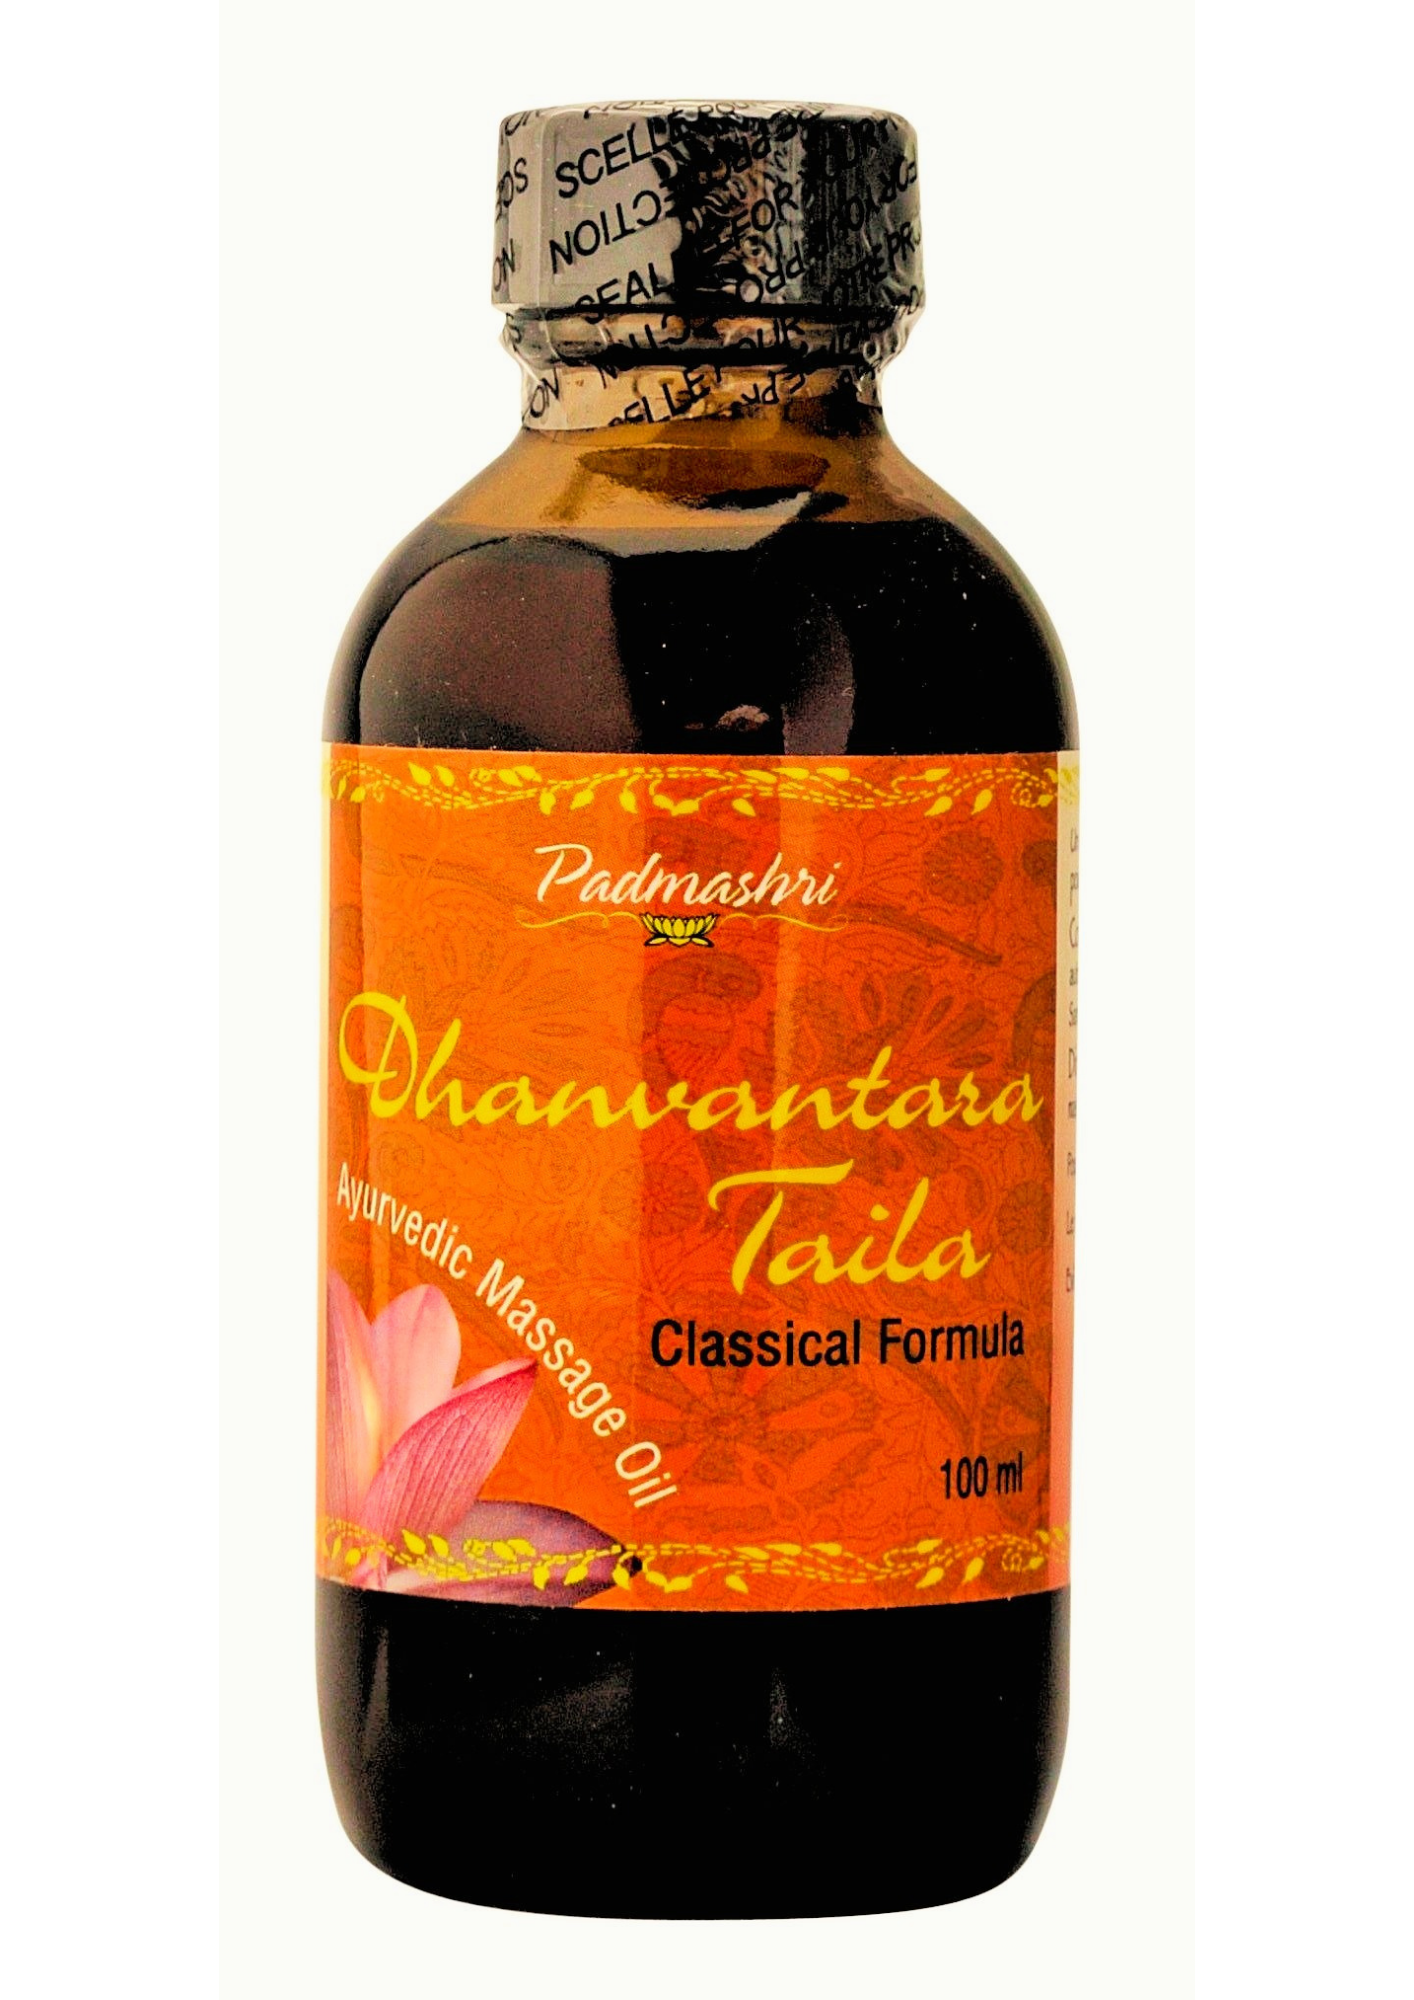 Ayurvedic Dhanvantara Classical Massage Oil - The massage with this oil helps diminish the appearance of stretch marks with regular use to leave skin looking smooth and flexible. Suitable for professional use in wellness clinics as well as self-care. Provides essential nourishment and moisture to the skin.